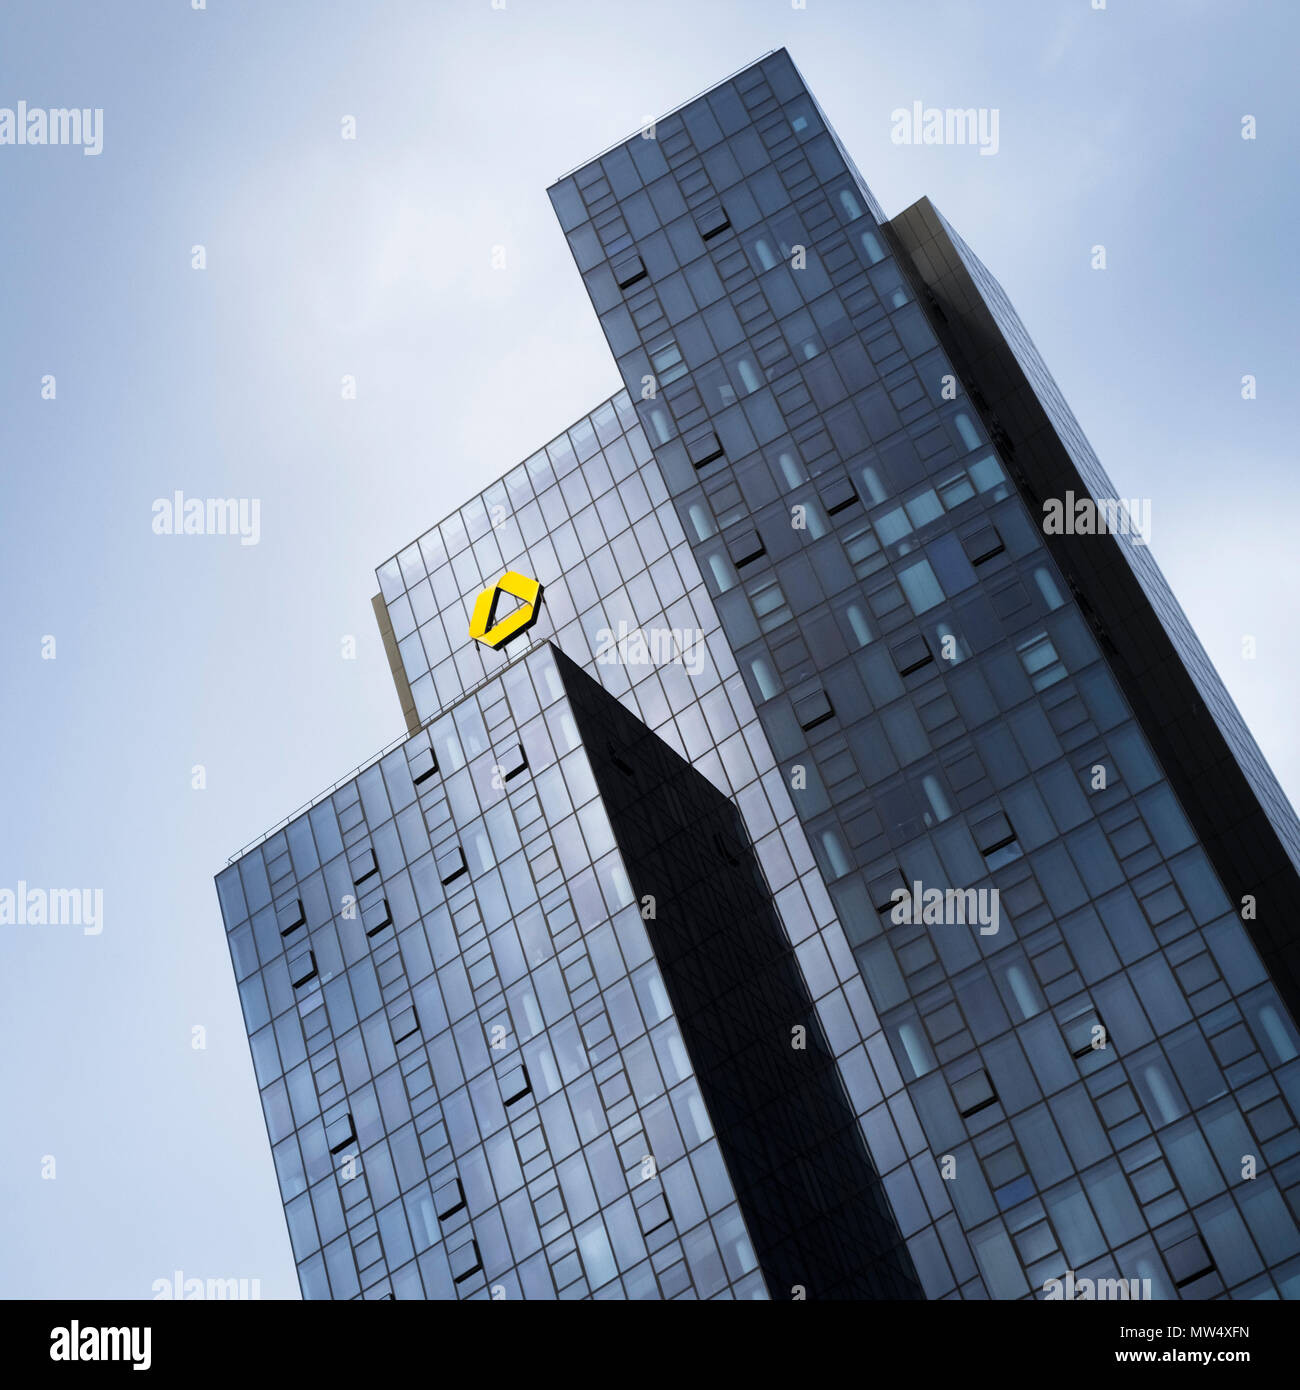 The Commerzbank Gallileo office tower, a modern 38-storey skyscraper in the Bahnhofsviertel district of Frankfurt am Main, Hesse, Germany Stock Photo